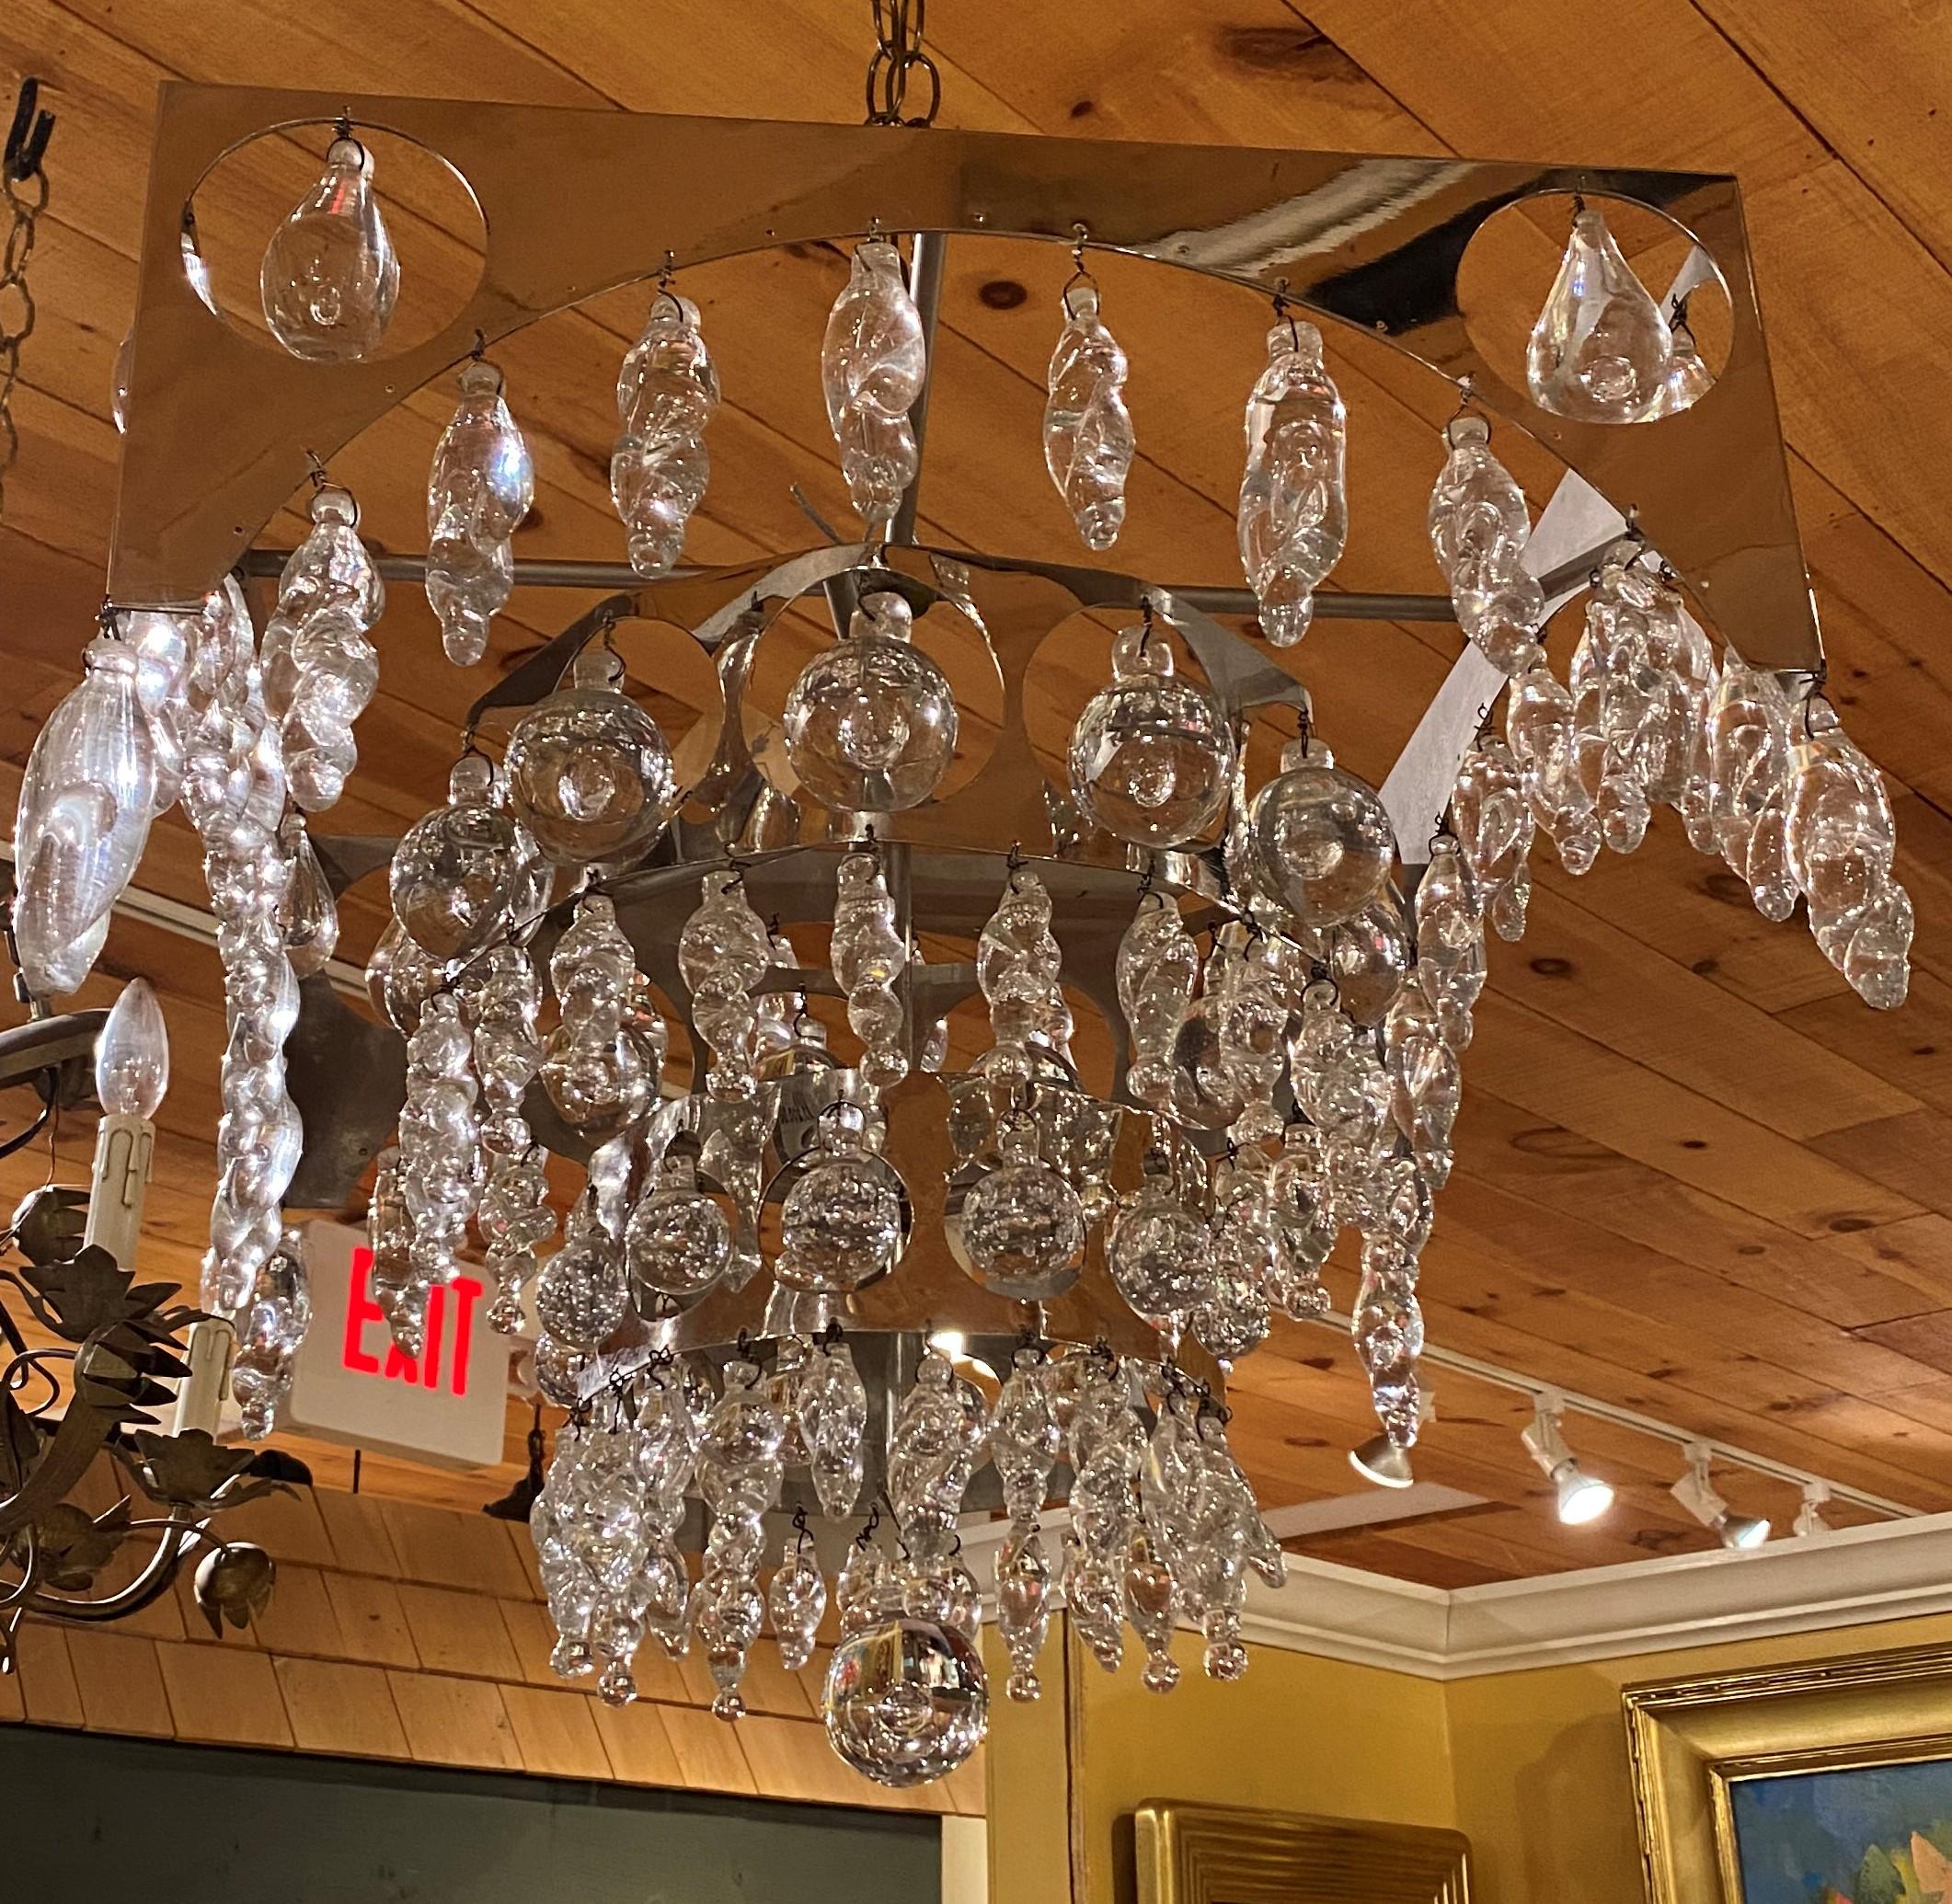 A fine mid-20th century designer chrome and crystal three-tier chandelier by Nepir Portugal in the Art Deco style with square top tier and two graduated round lower tiers, each adorned with solid round bubble glass pendants, as well as smaller